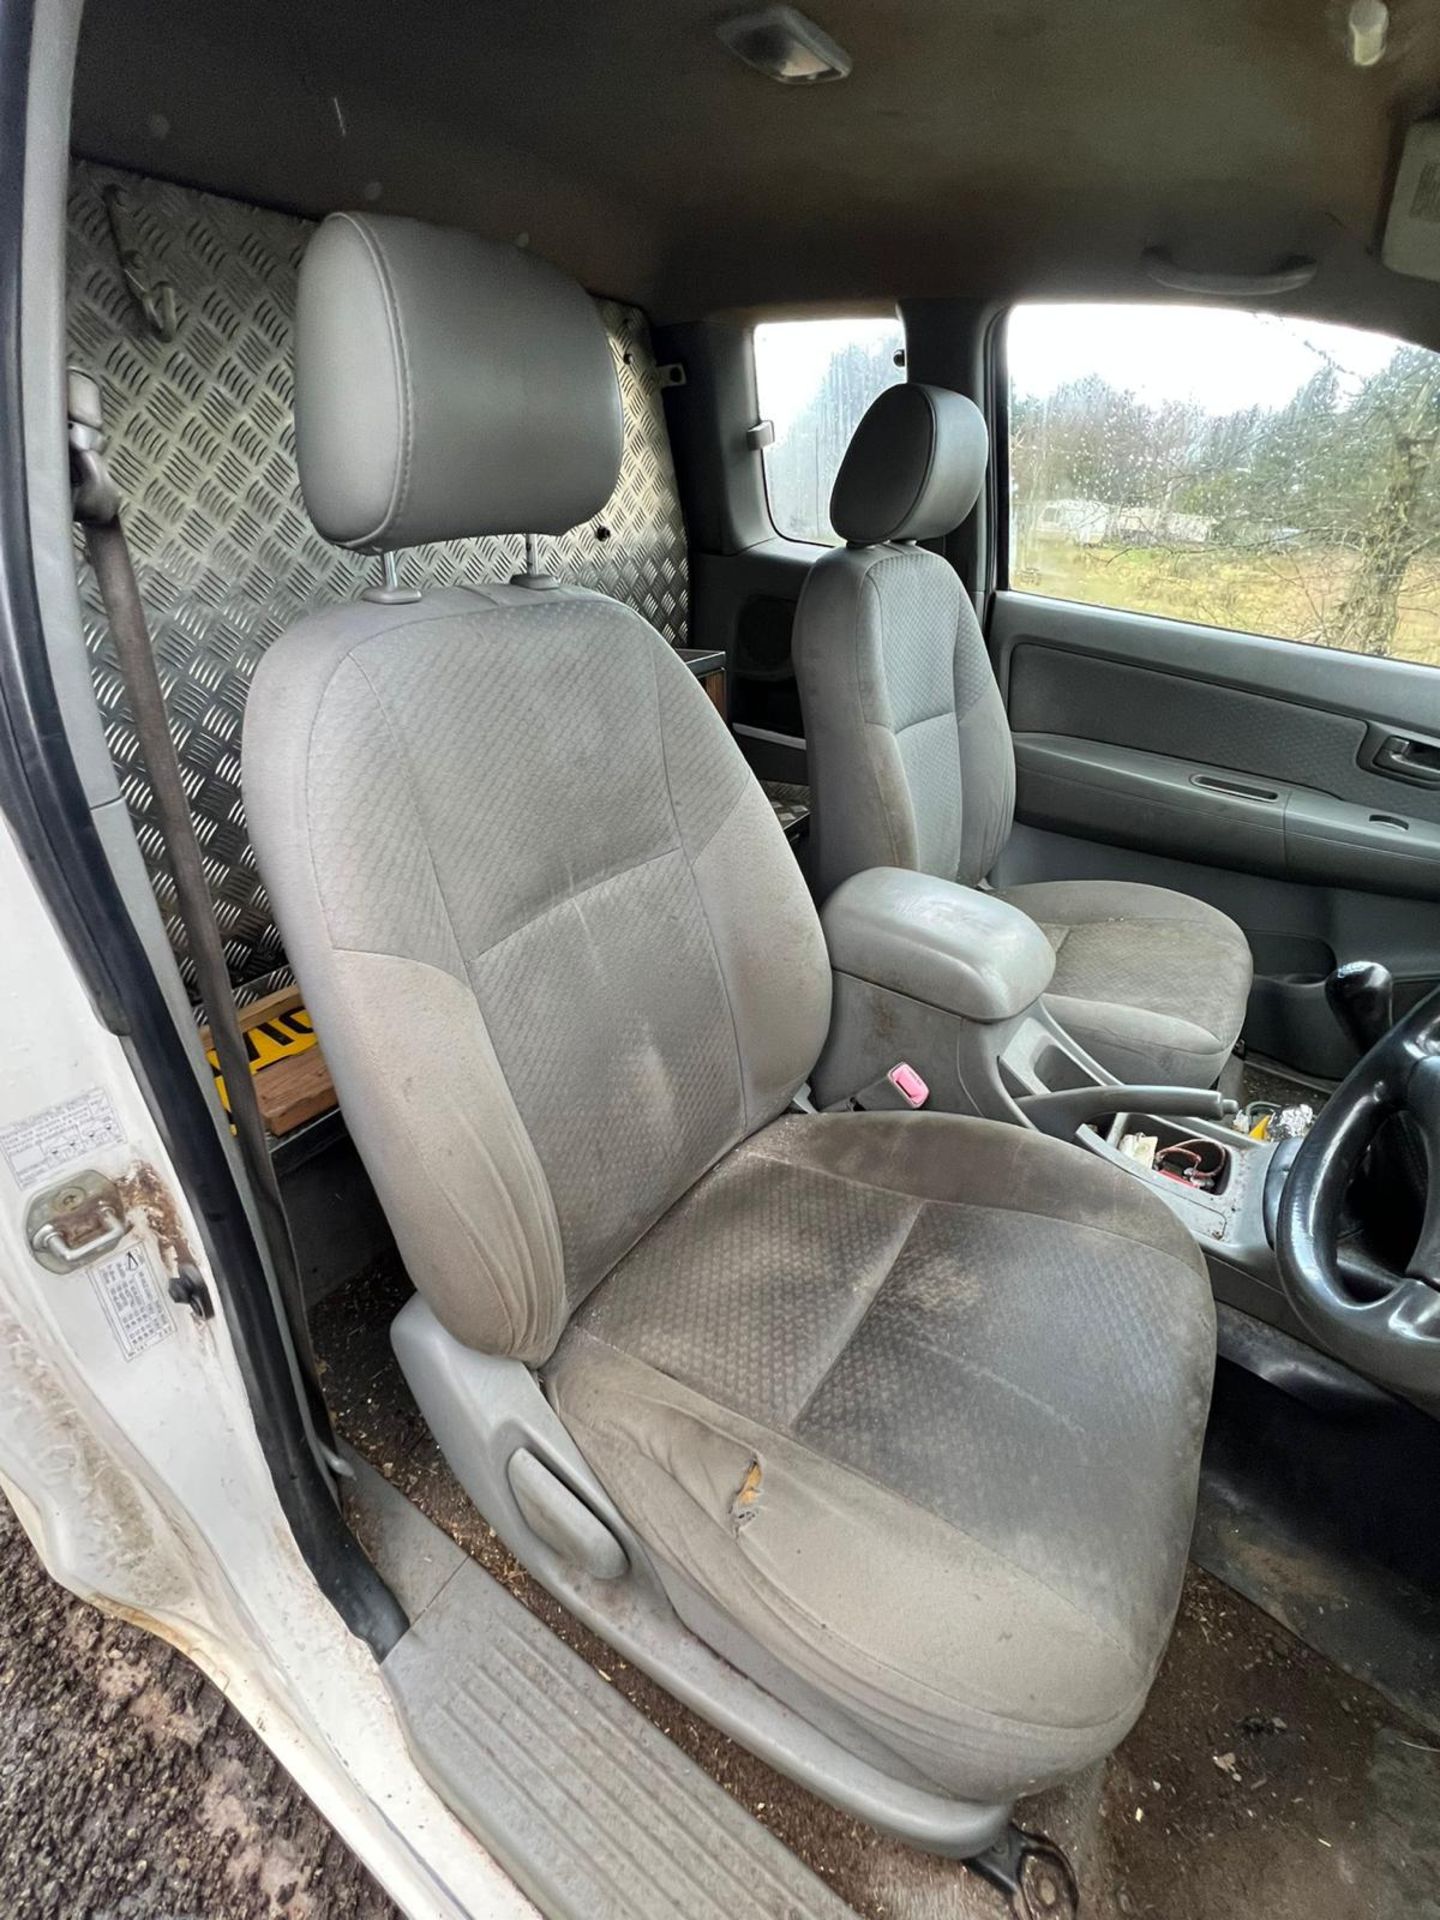 TOYOTA HILUX KING CAB 2010 EX COUNCIL - Image 14 of 16